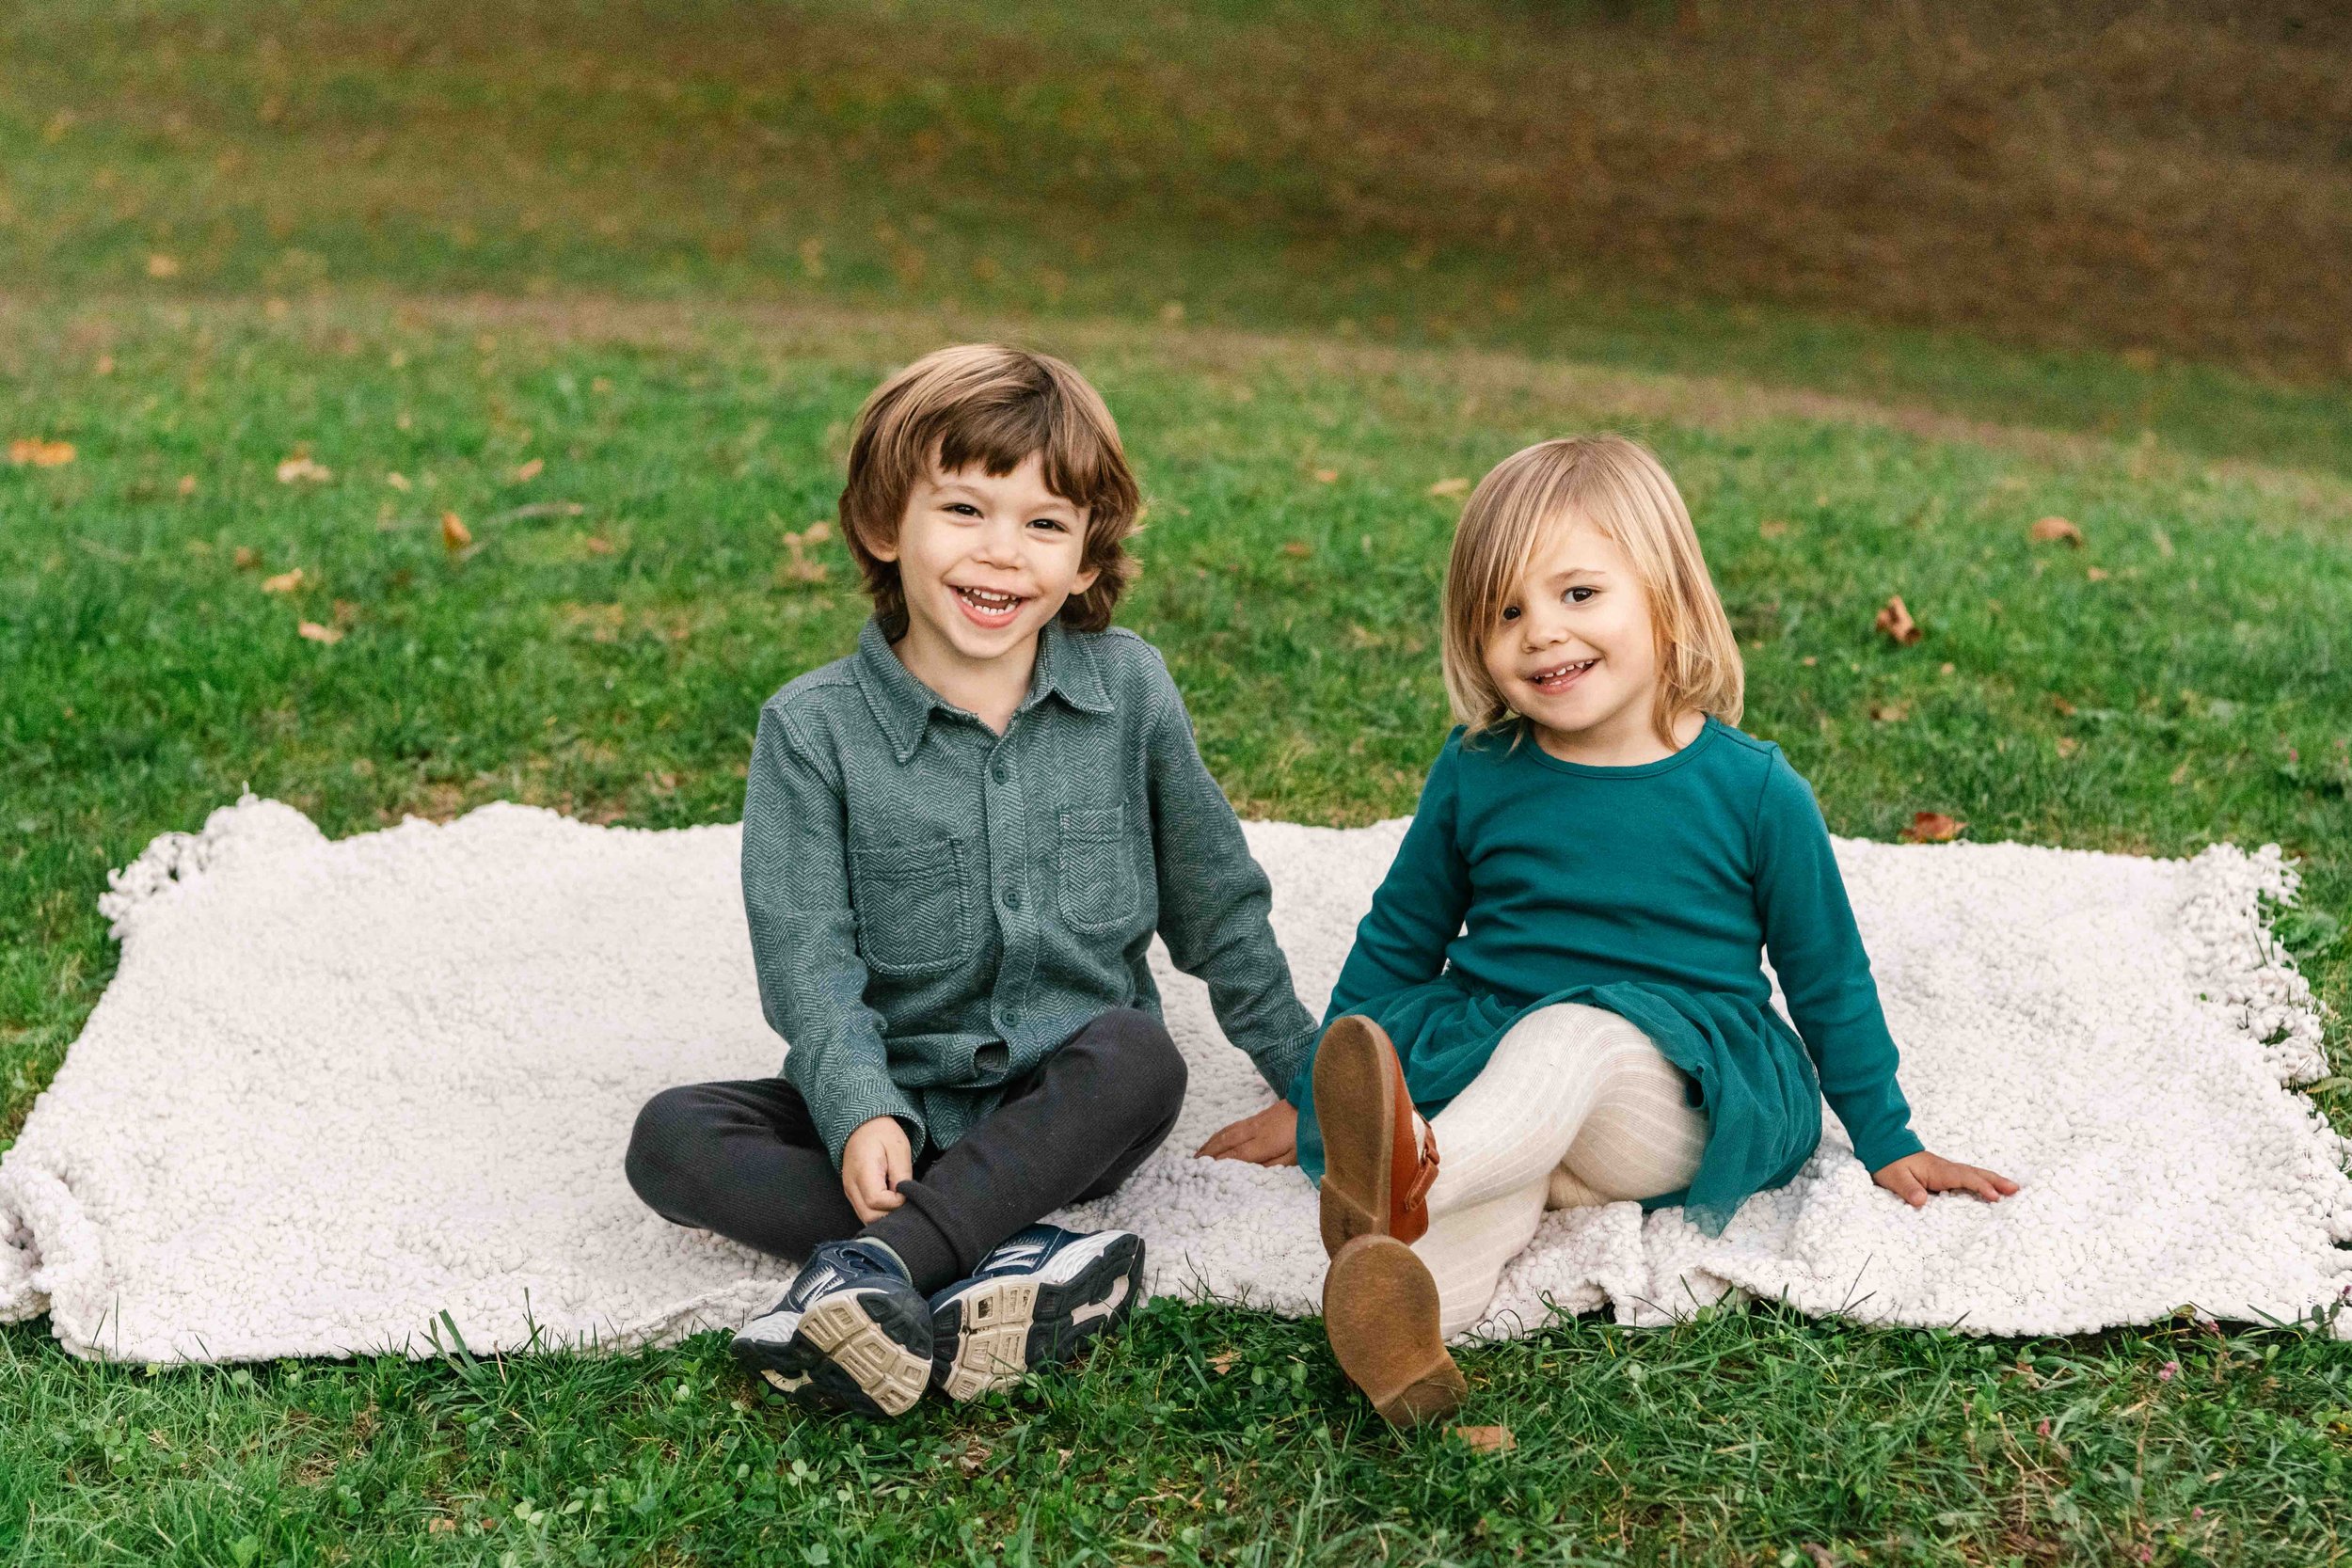  A brother and sister sitting on a blanket in a grass park in New York by Nicole Hawkins Photography. brother and sister picnic portrait sitting on a blanket #NicoleHawkinsPhotography #NicoleHawkinsFamilies #NJphotographers #familyphotos #CentralPark